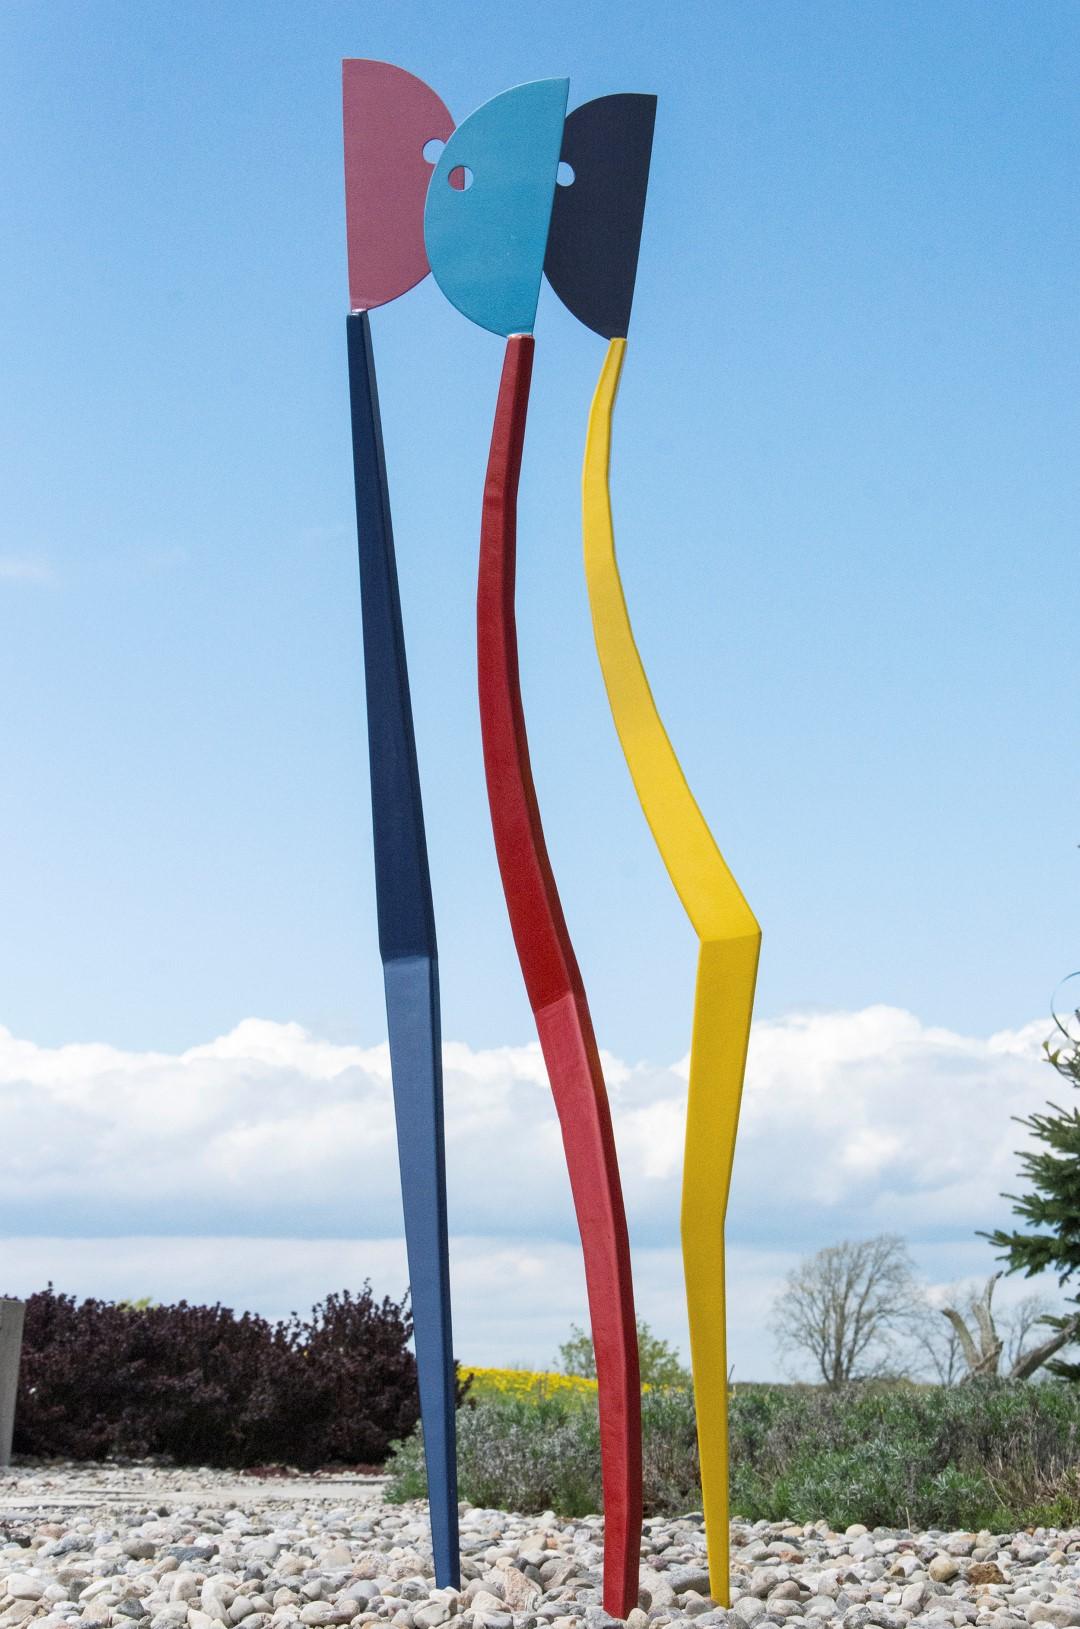 Interloper - colourful, playful, abstracted figures, painted steel sculpture